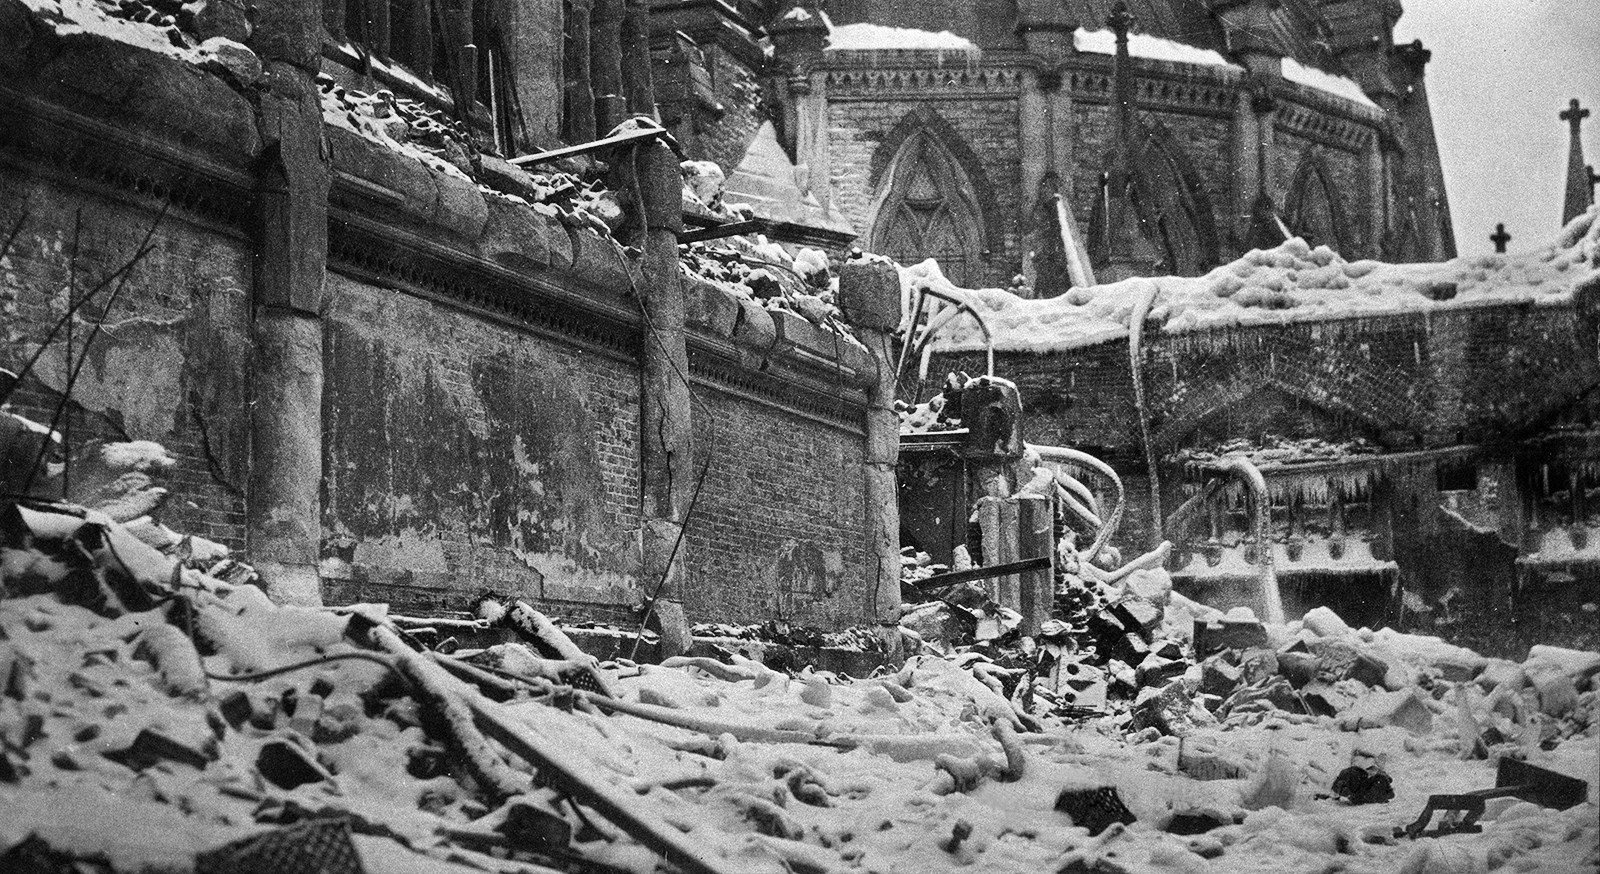 The morning after the fire, the Senate Chamber was reduced to rubble. (Photo credit: Library and Archives Canada)